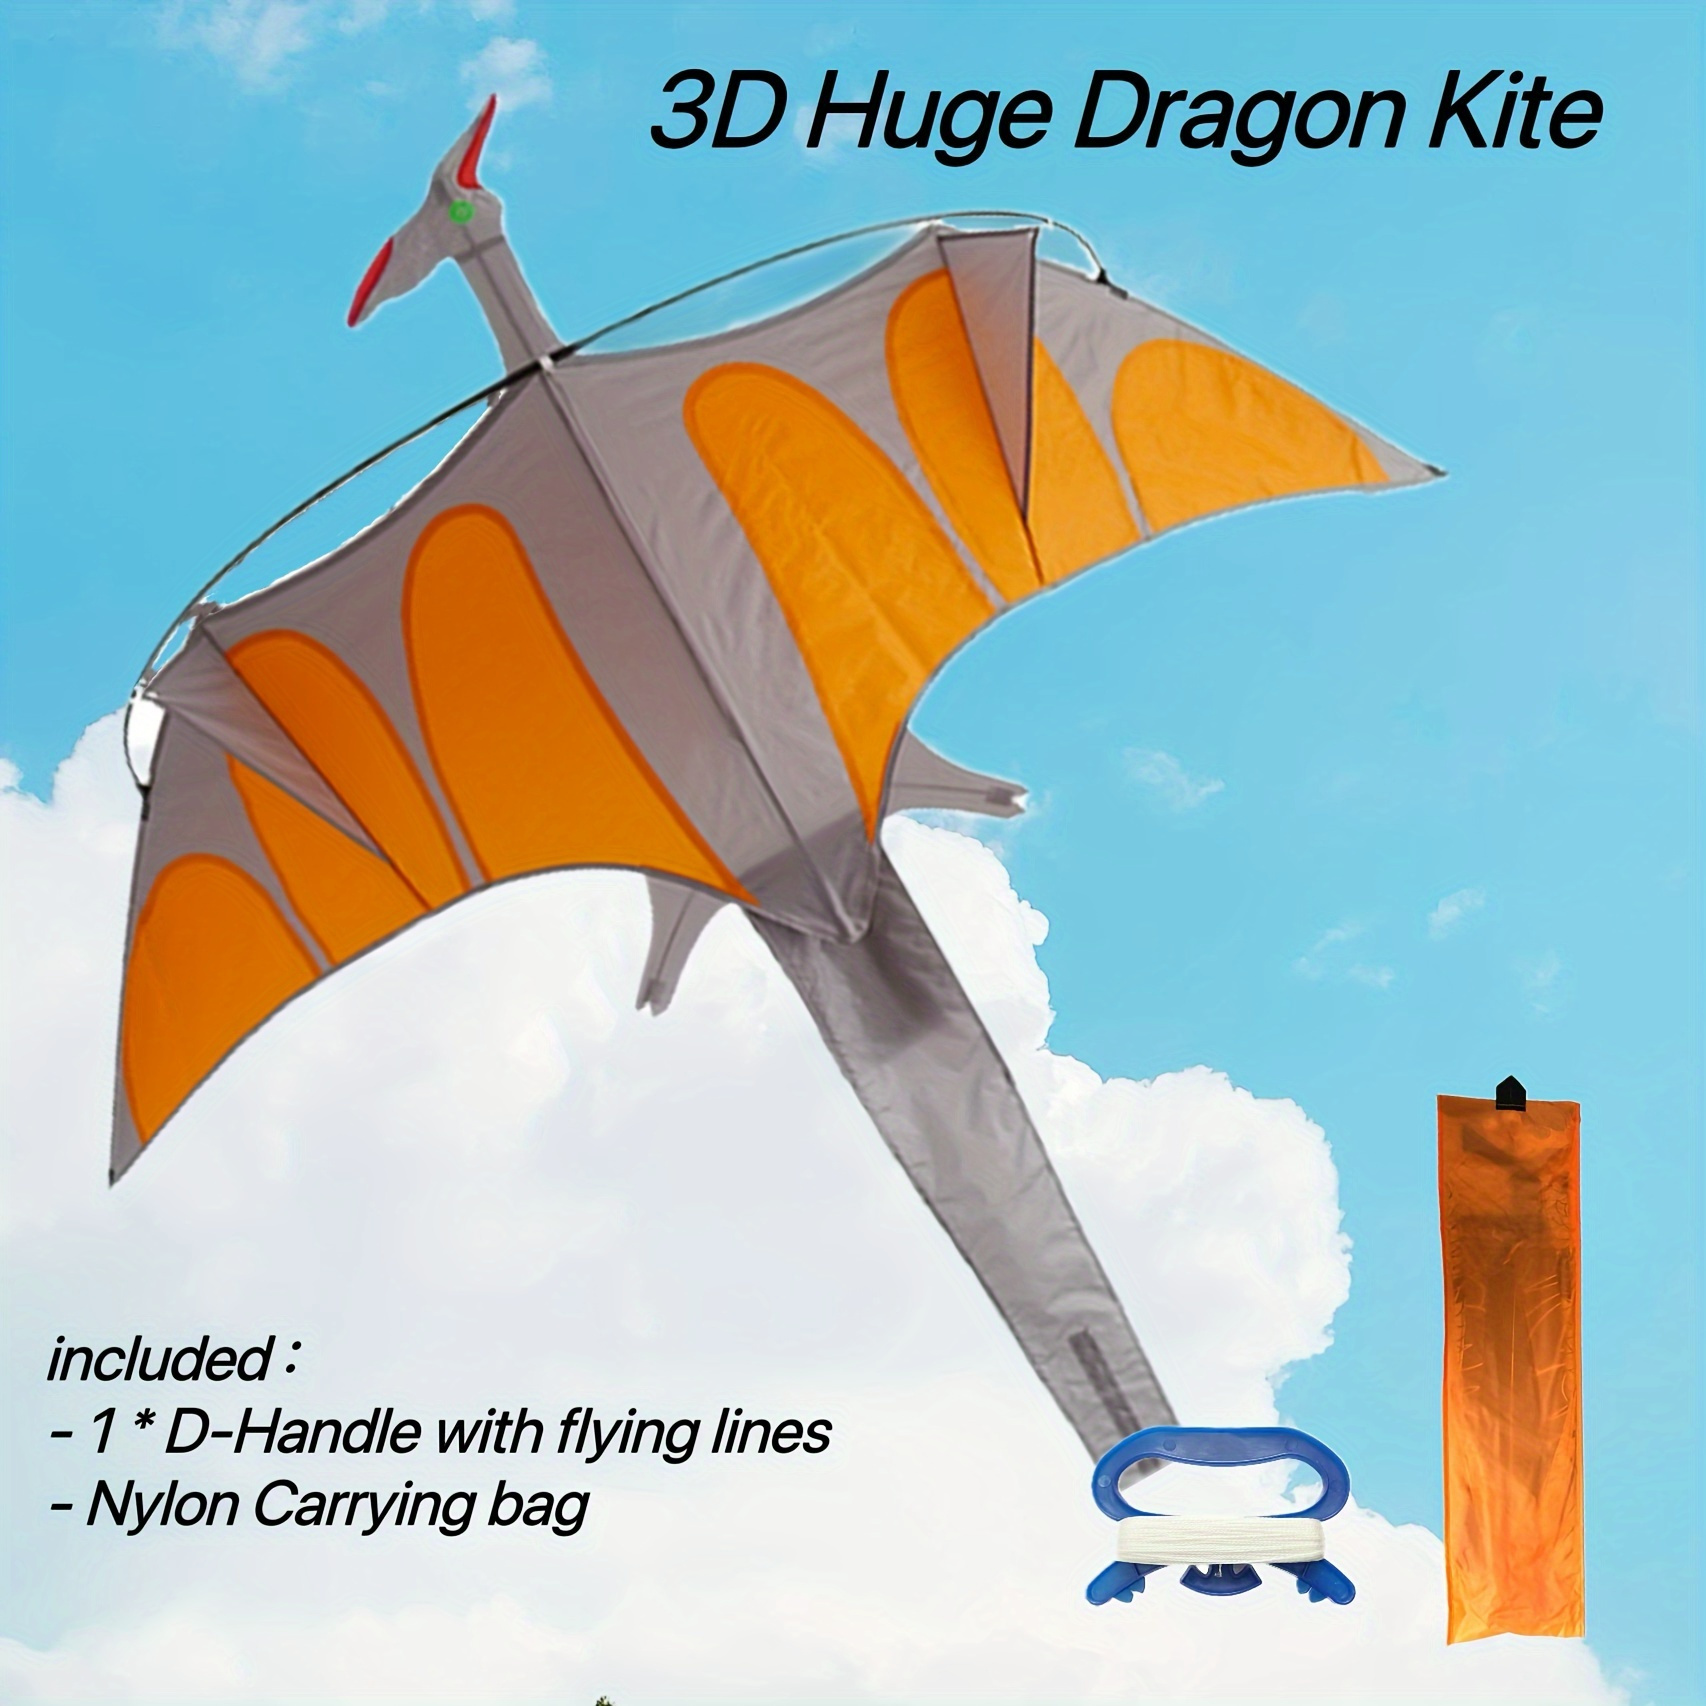 How to Assembly a Dragon Kite 